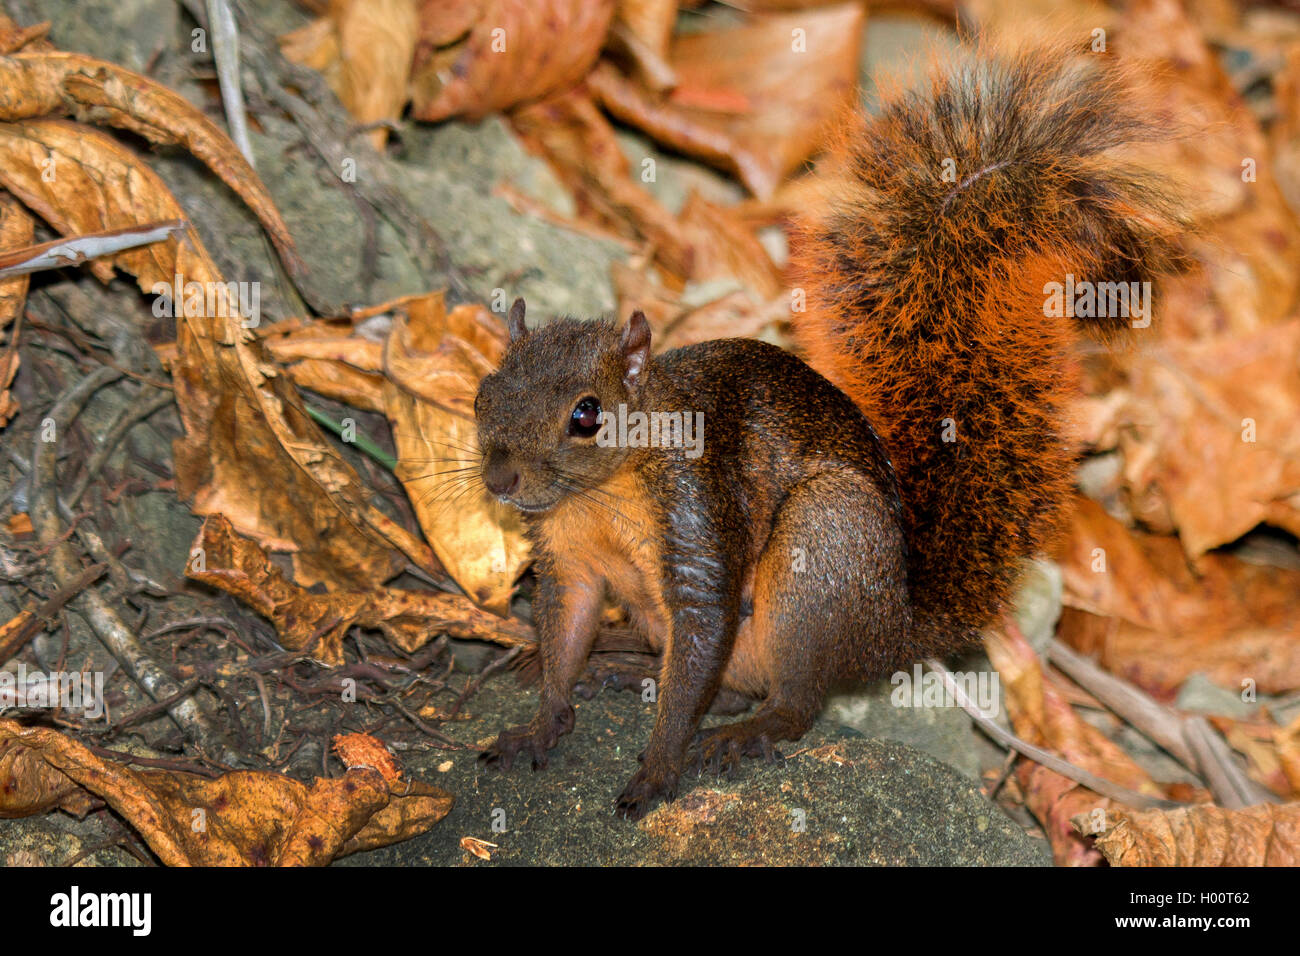 Tropical red squirrel, Red-tailed Squirrel (Sciurus granatensis), on fallen leaves on the ground, Costa Rica Stock Photo